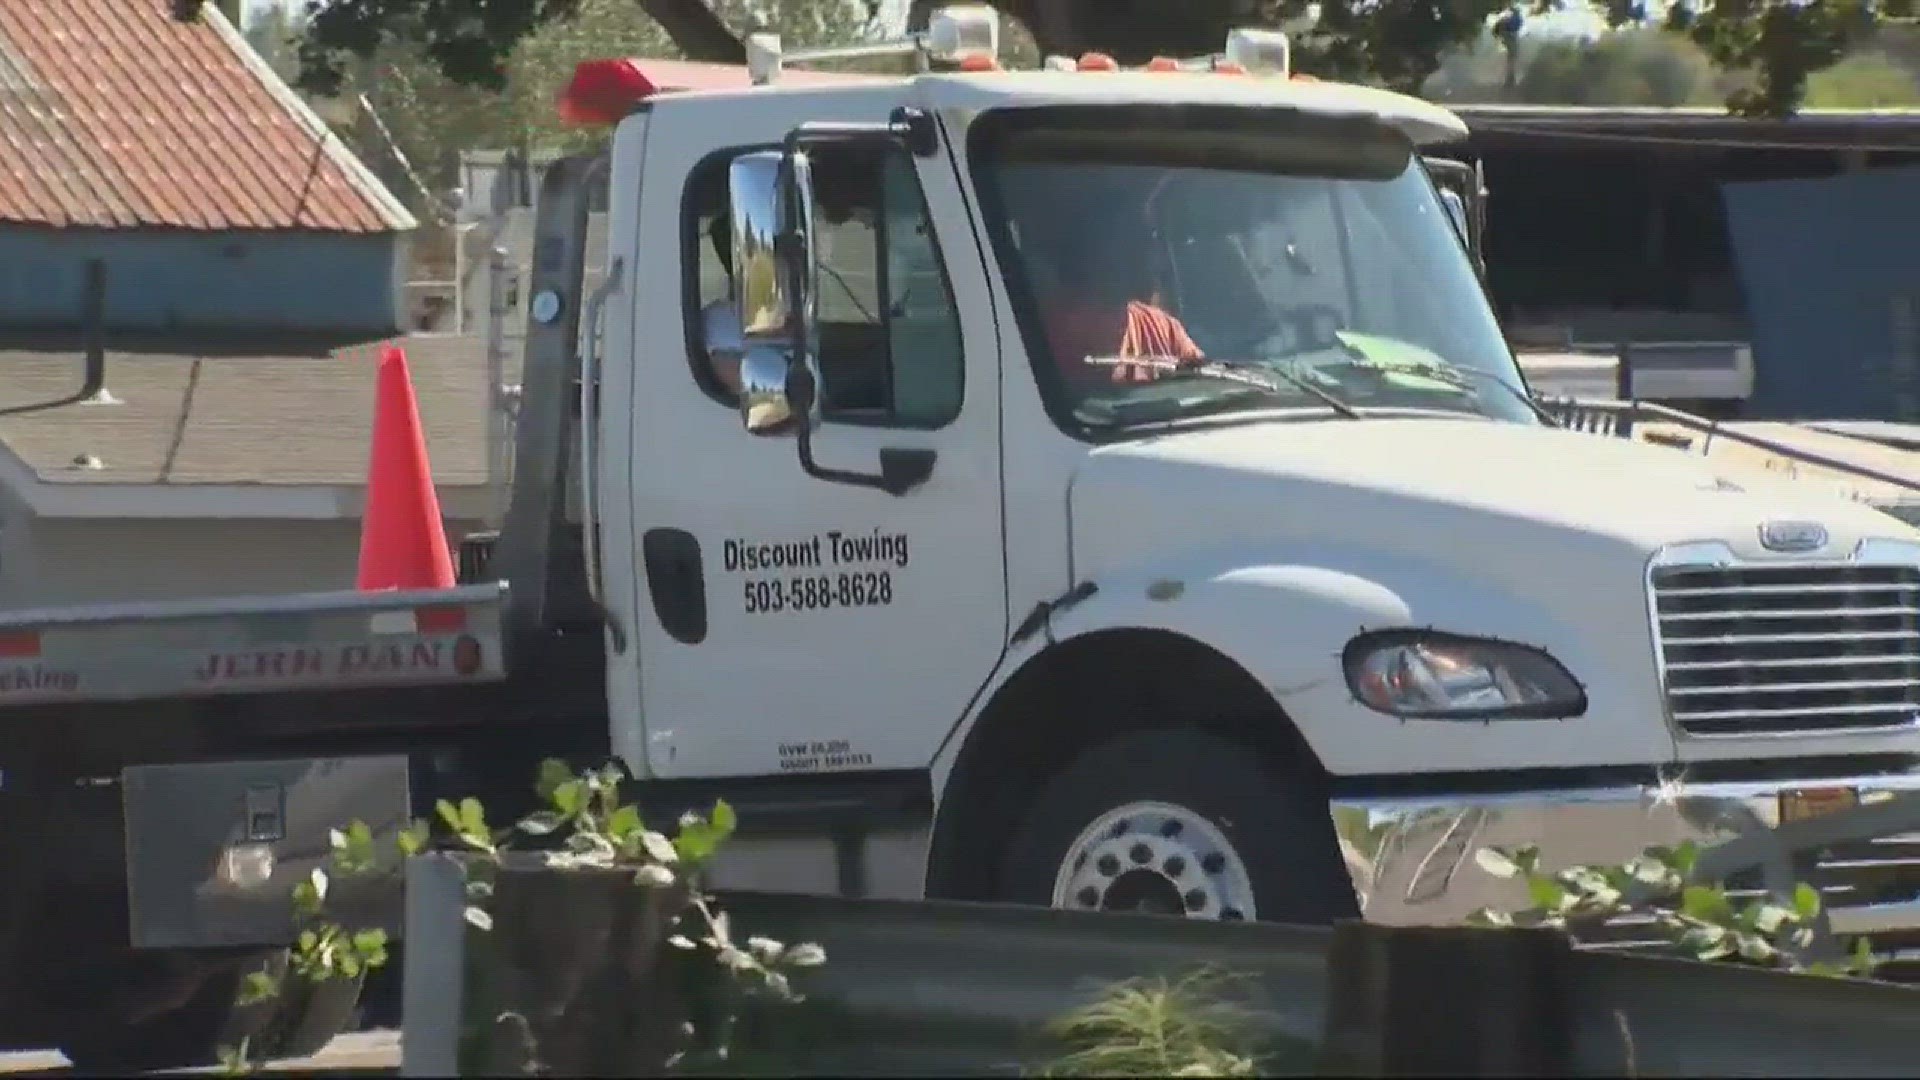 Lawmakers respond to towing investigation